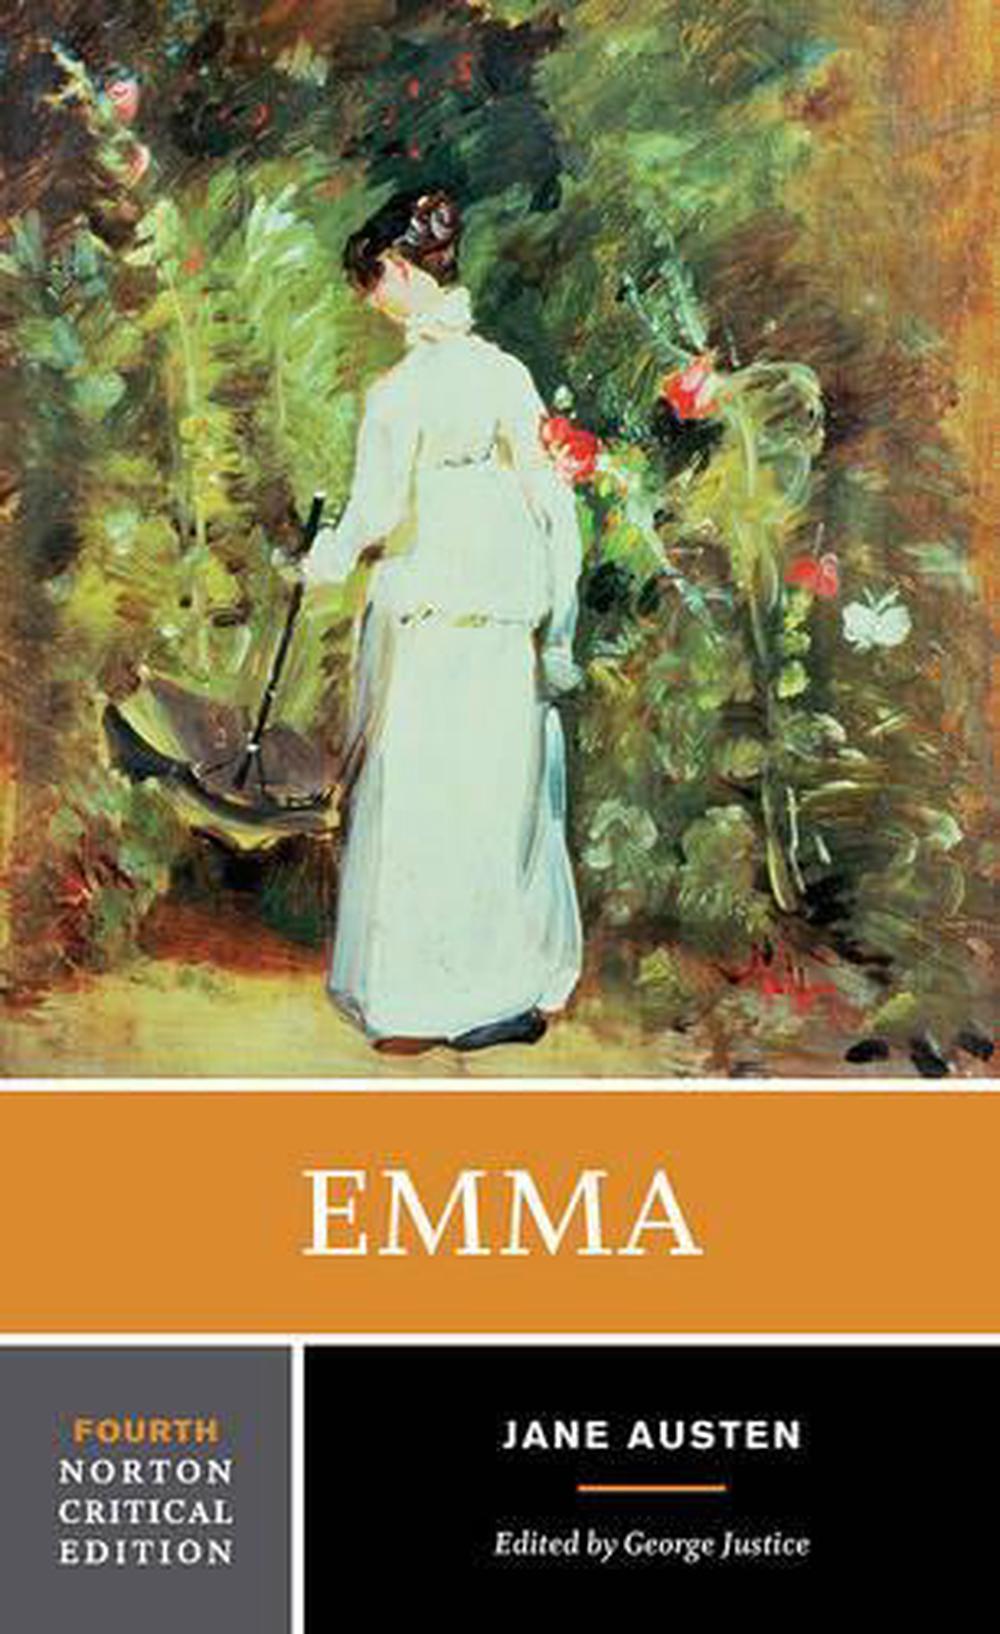 The　Buy　Edition　9780393927641　by　Paperback,　Nile　Jane　4th　Emma,　at　Austen,　online